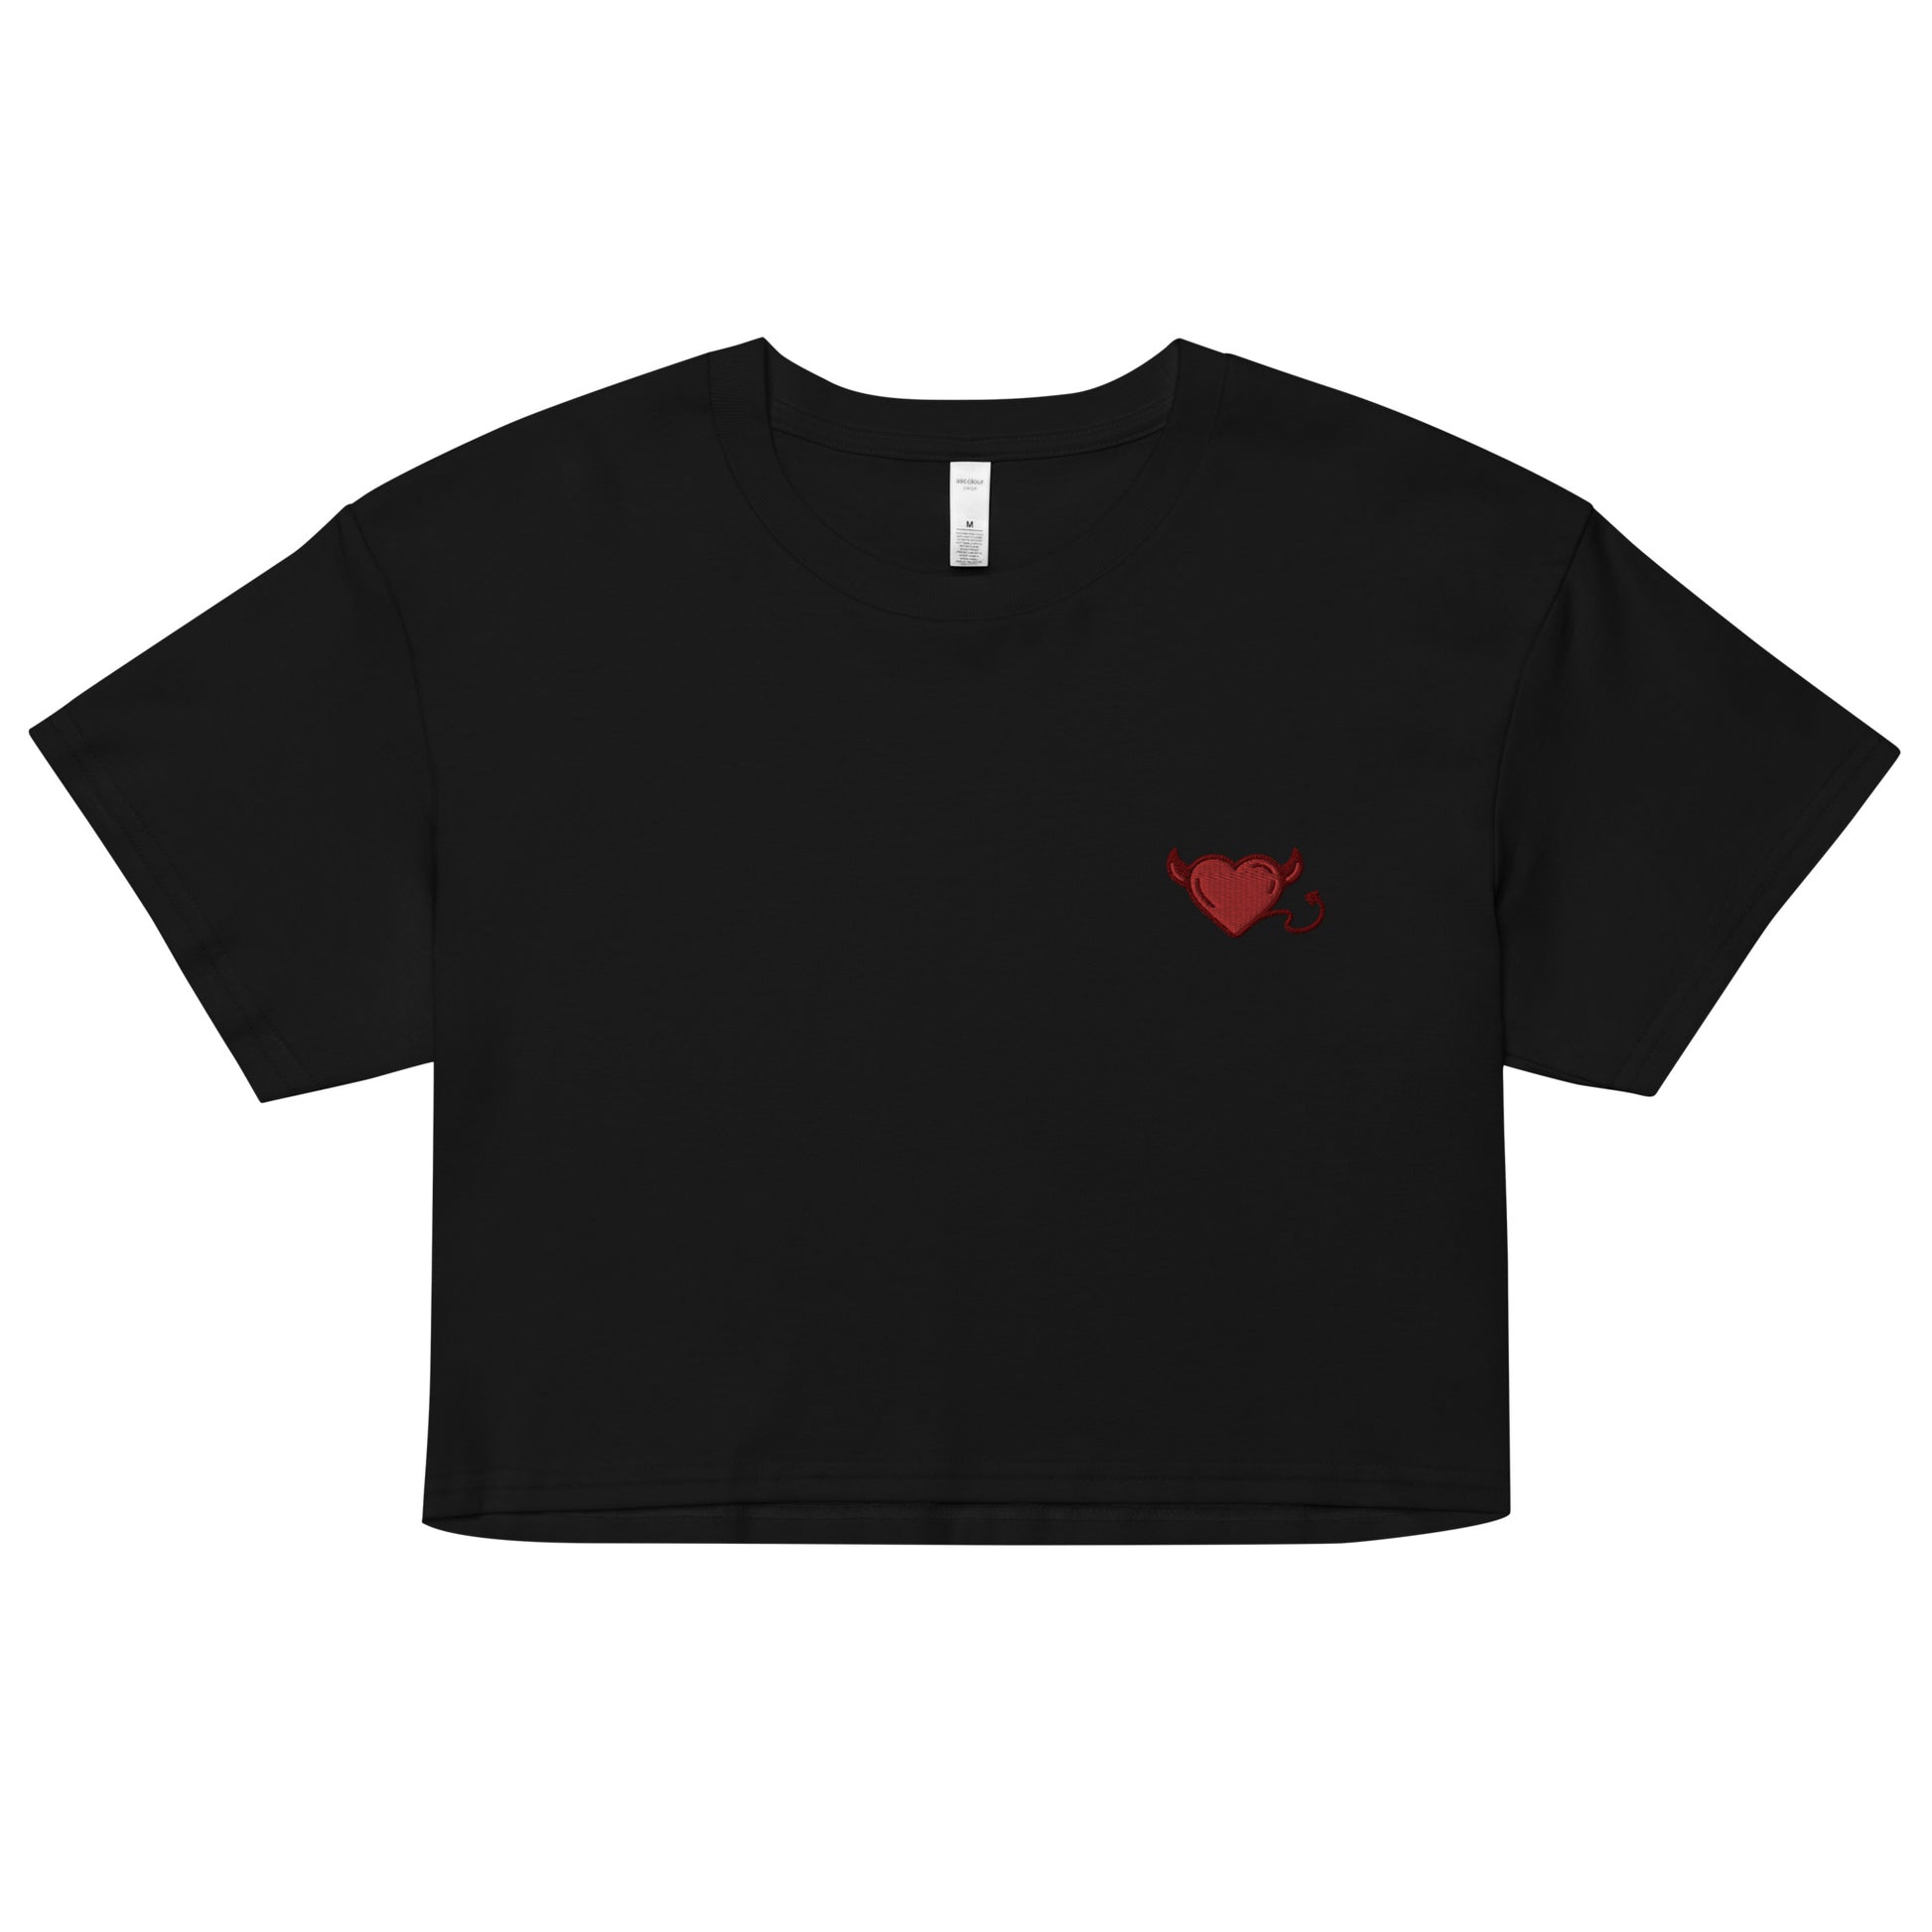 A relaxed, modest black crop top features a subtle red embroidery featuring a devil's heart. Adding a touch of mischief to your look—a playful celebration of lgbtq culture! Made from 100% combed cotton. Available in Extra Small, Small, Medium, Large, Extra Large.